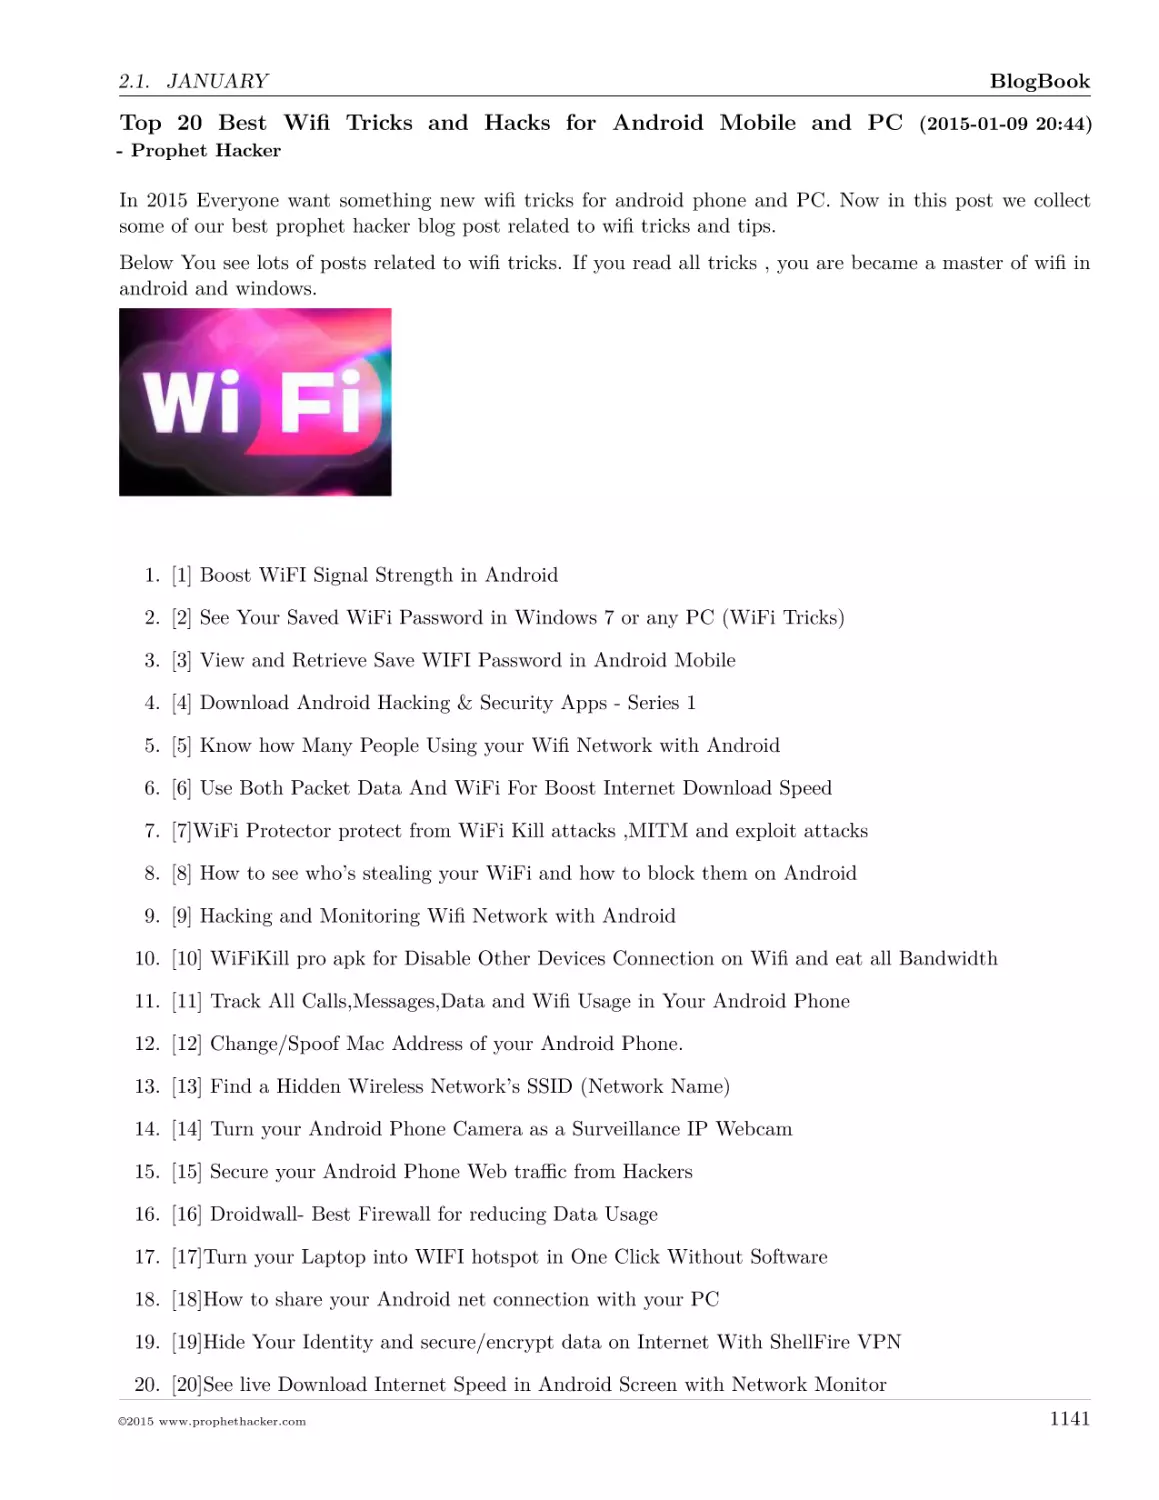 Top 20 Best Wifi Tricks and Hacks for Android Mobile and PC (2015-01-09 20